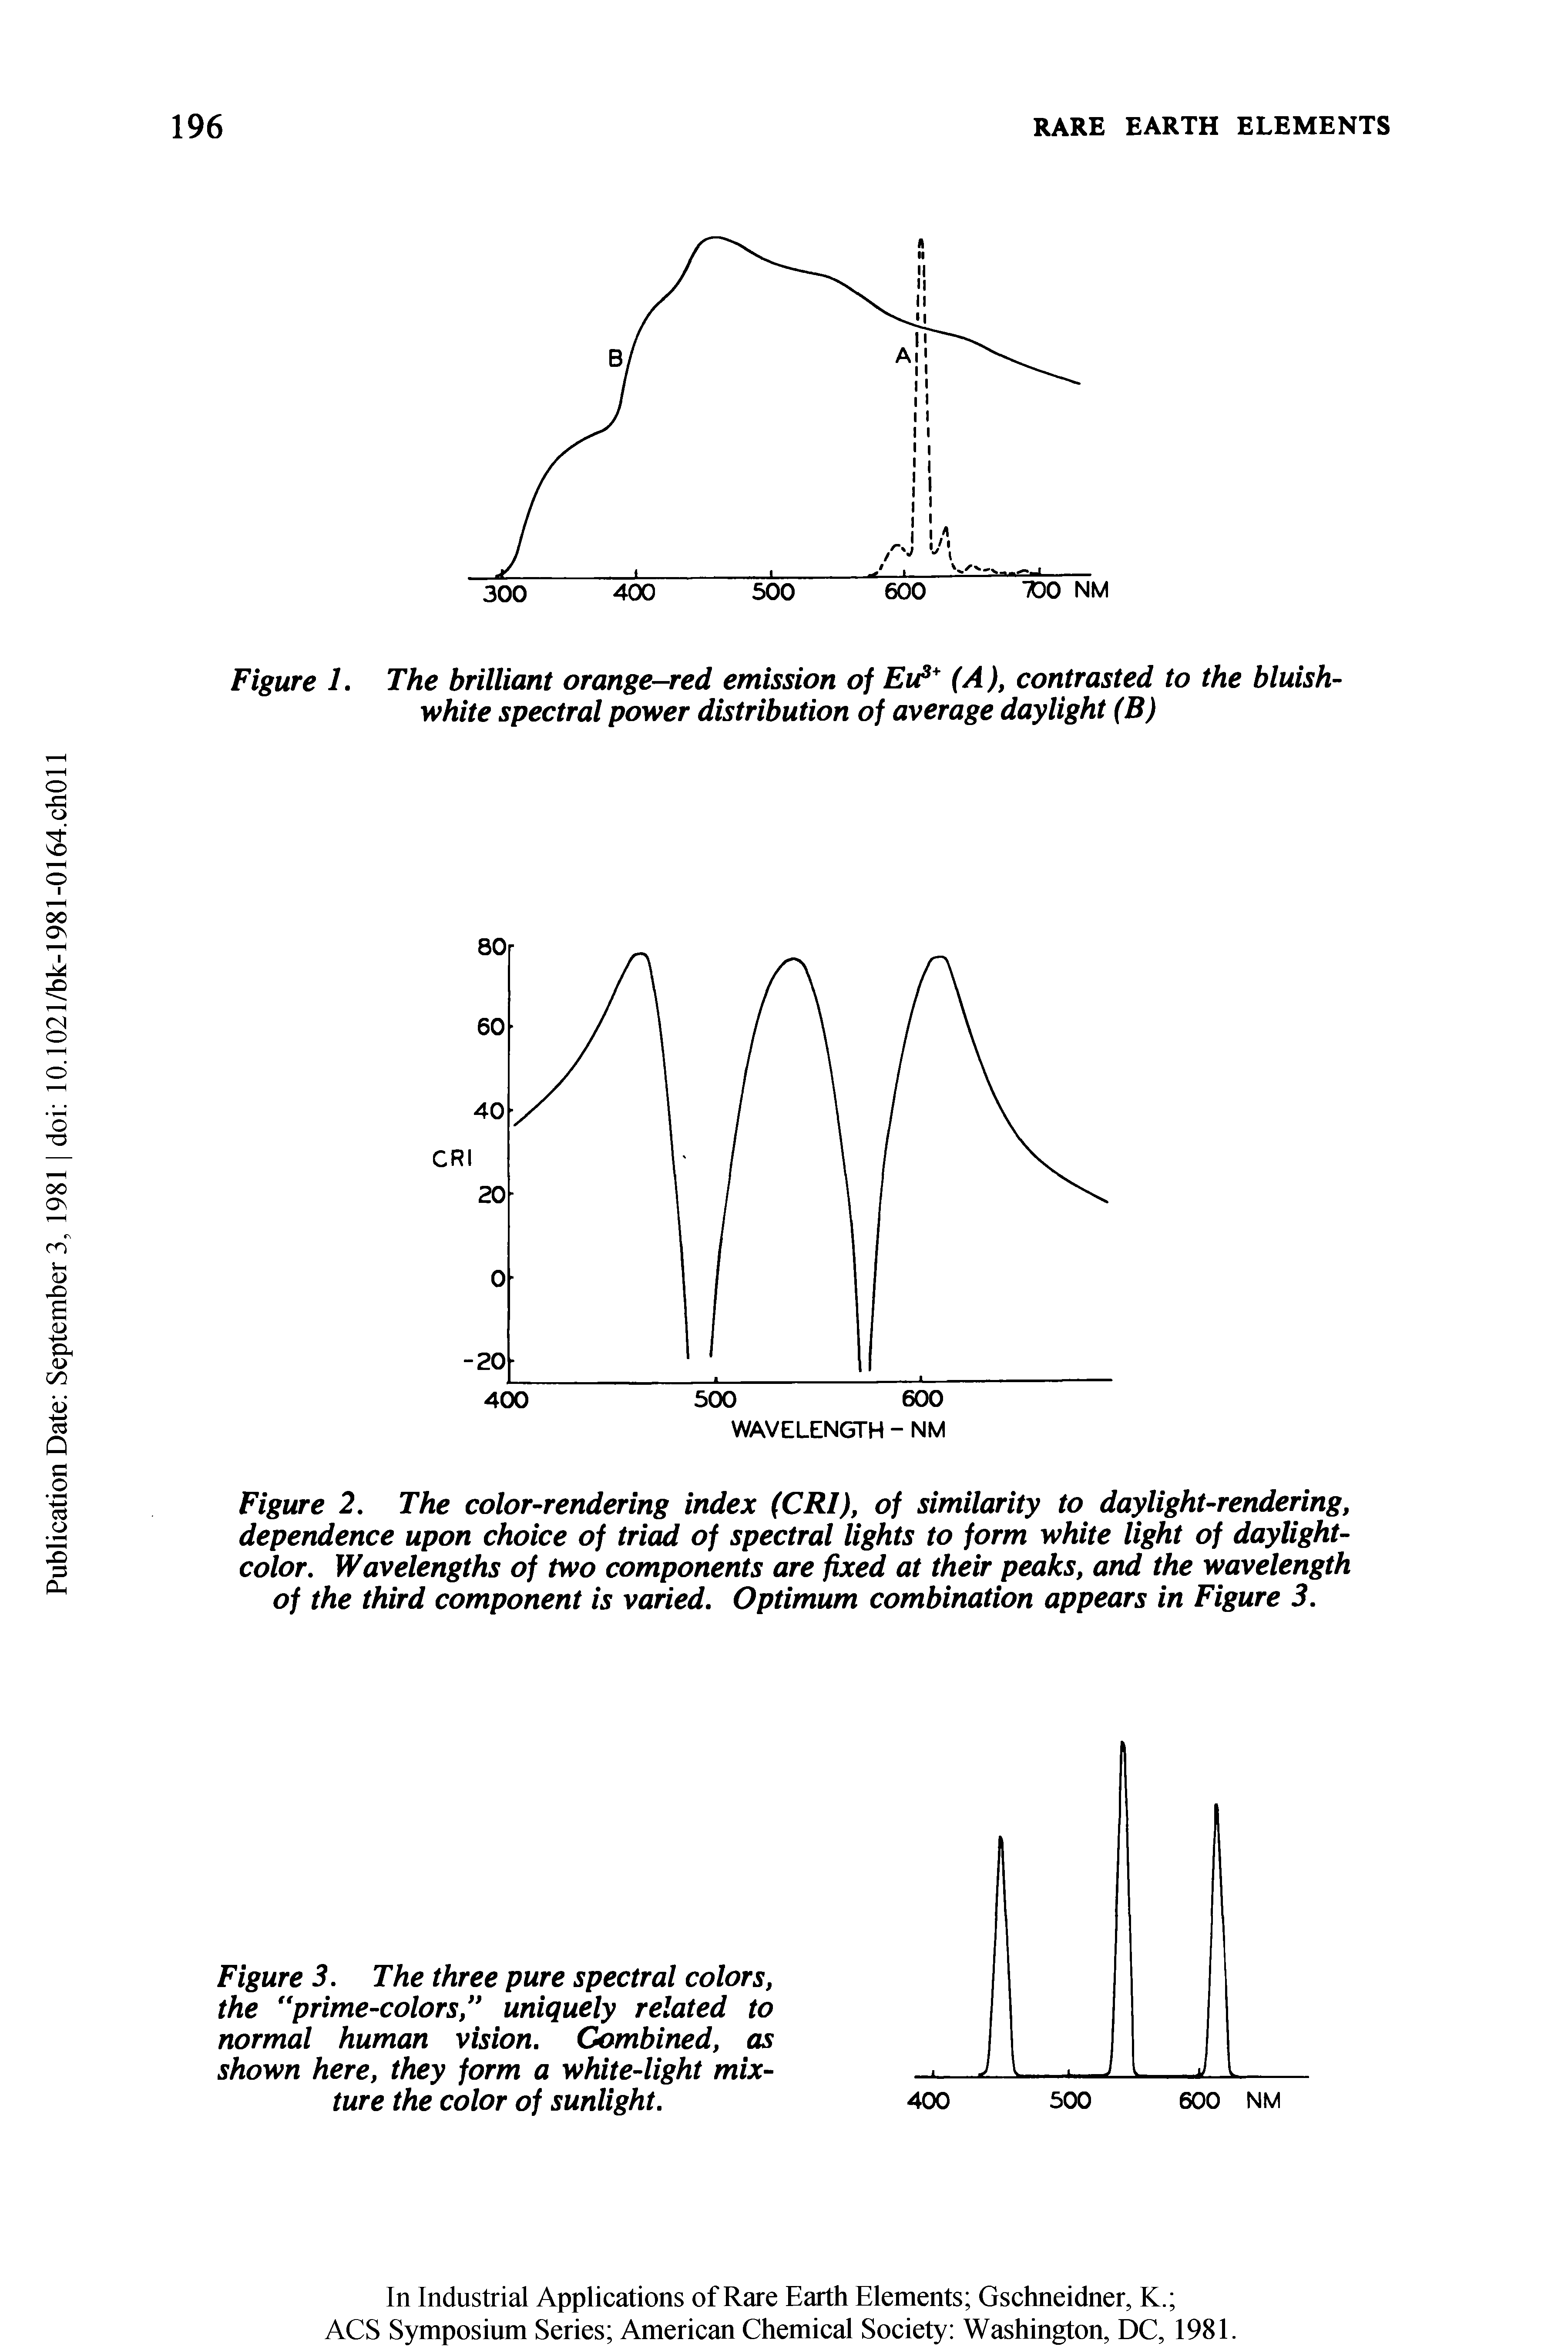 Figure 2. The color-rendering index (CRI), of similarity to daylight-rendering, dependence upon choice of triad of spectral lights to form white light of daylight-color. Wavelengths of two components are fixed at their peaks, and the wavelength of the third component is varied. Optimum combination appears in Figure 3.